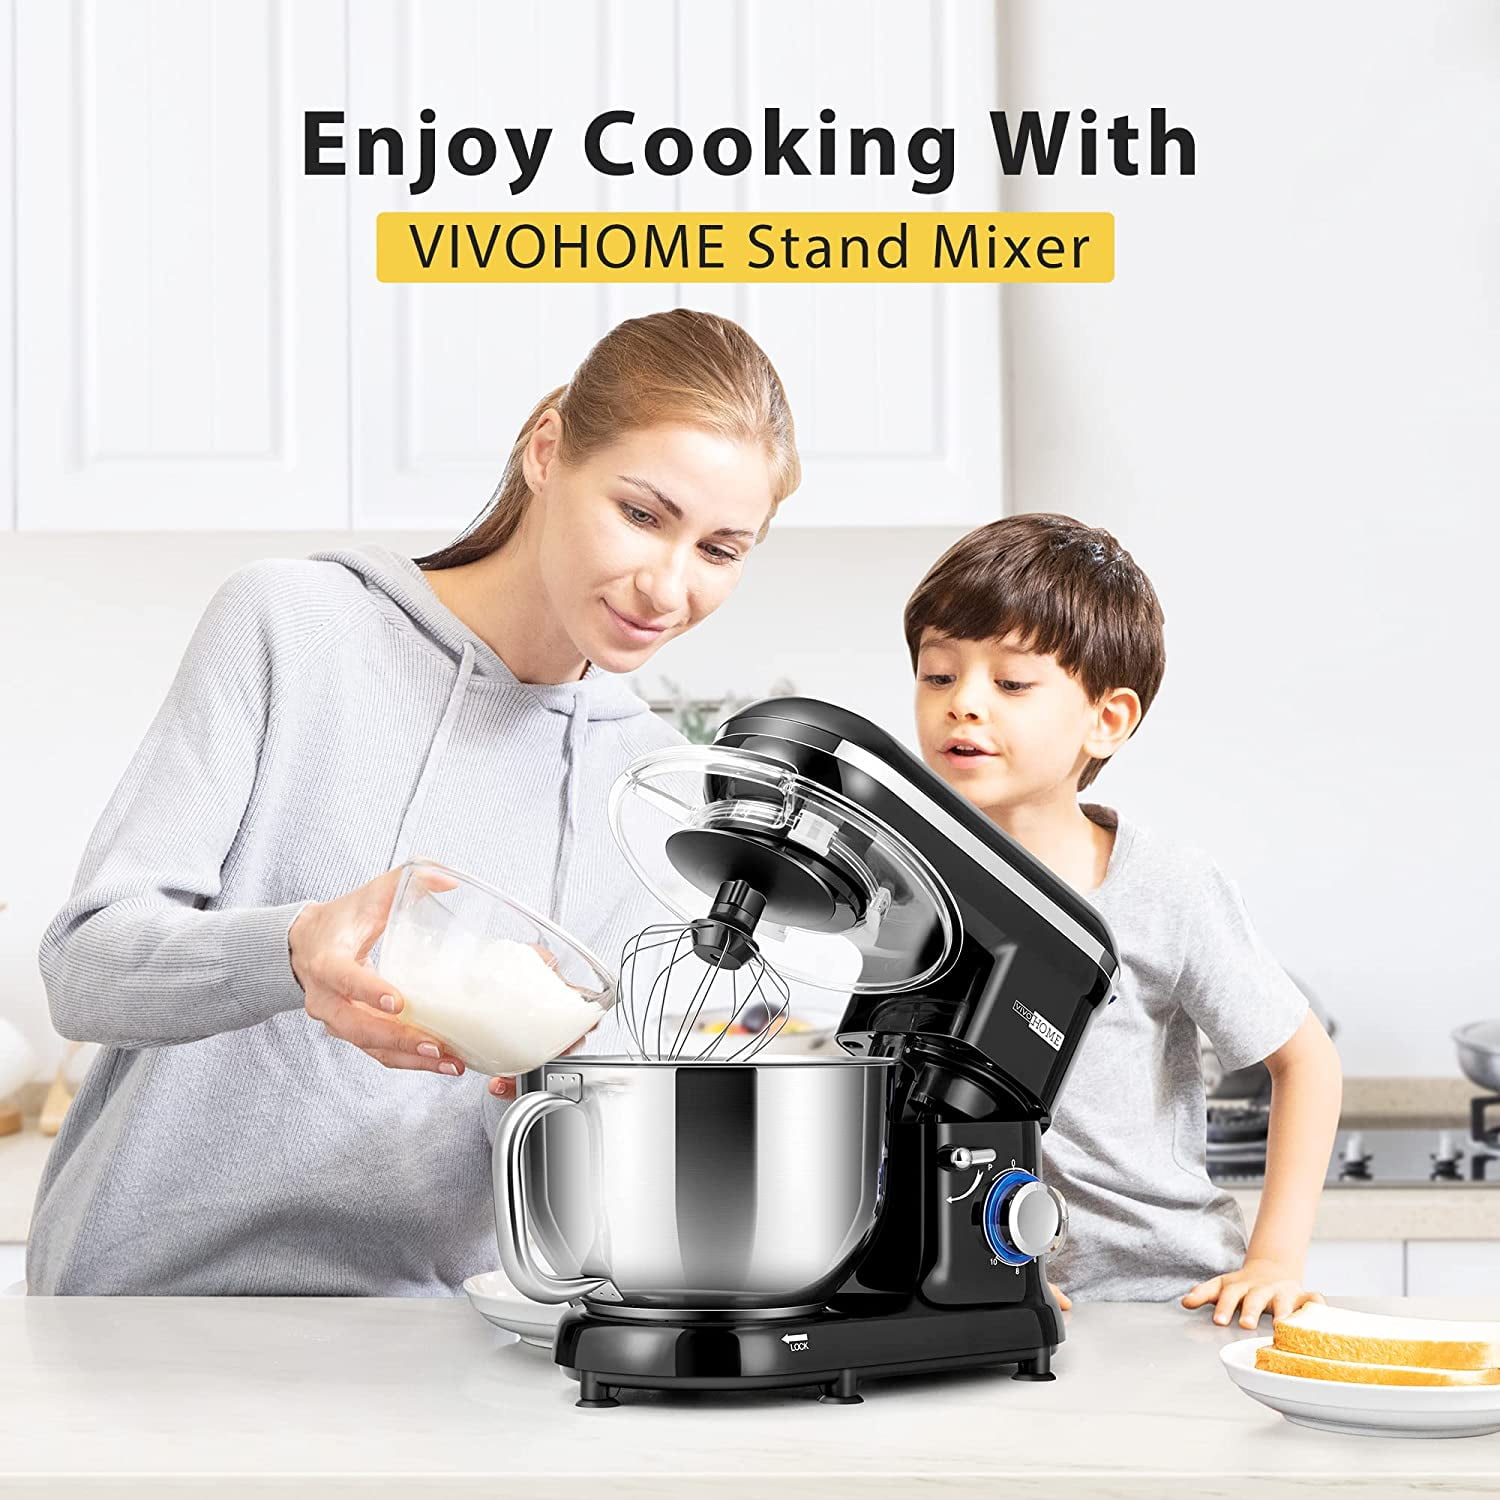 Samsaimo Stand Mixer,6.5-QT 660W 10-Speed Tilt-Head Food Mixer, Kitchen  Electric Mixer with Bowl, Dough Hook, Beater, Whisk for Most Home Cooks